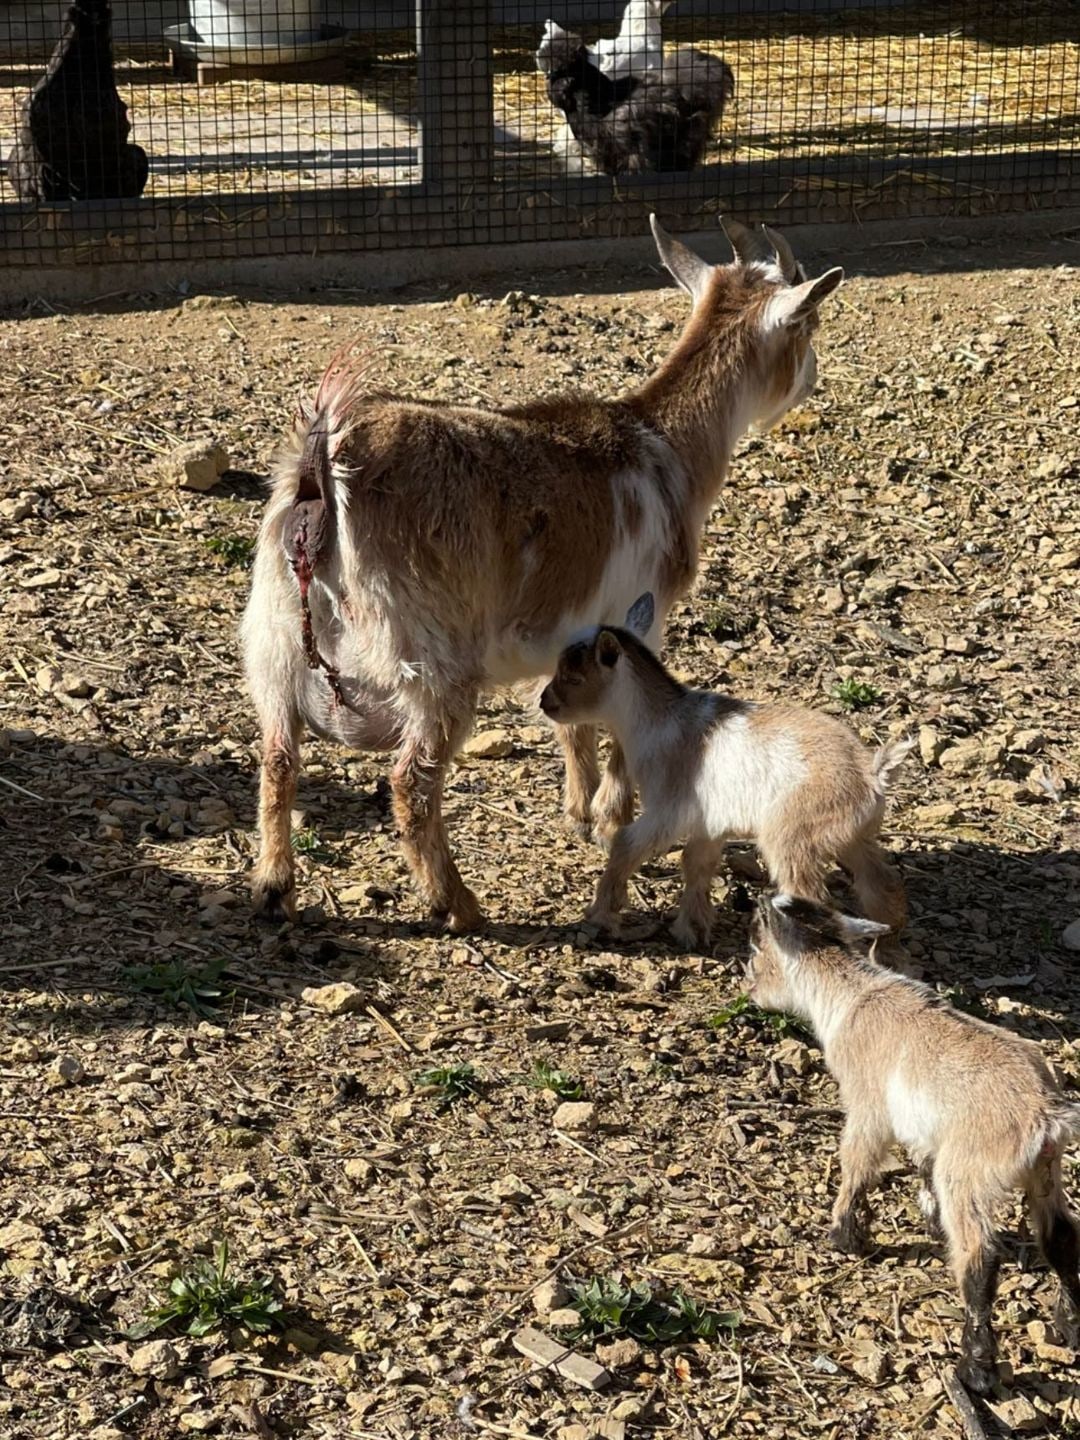 Screenshot of an Instagram story featuring two kids and an older goat on a farm